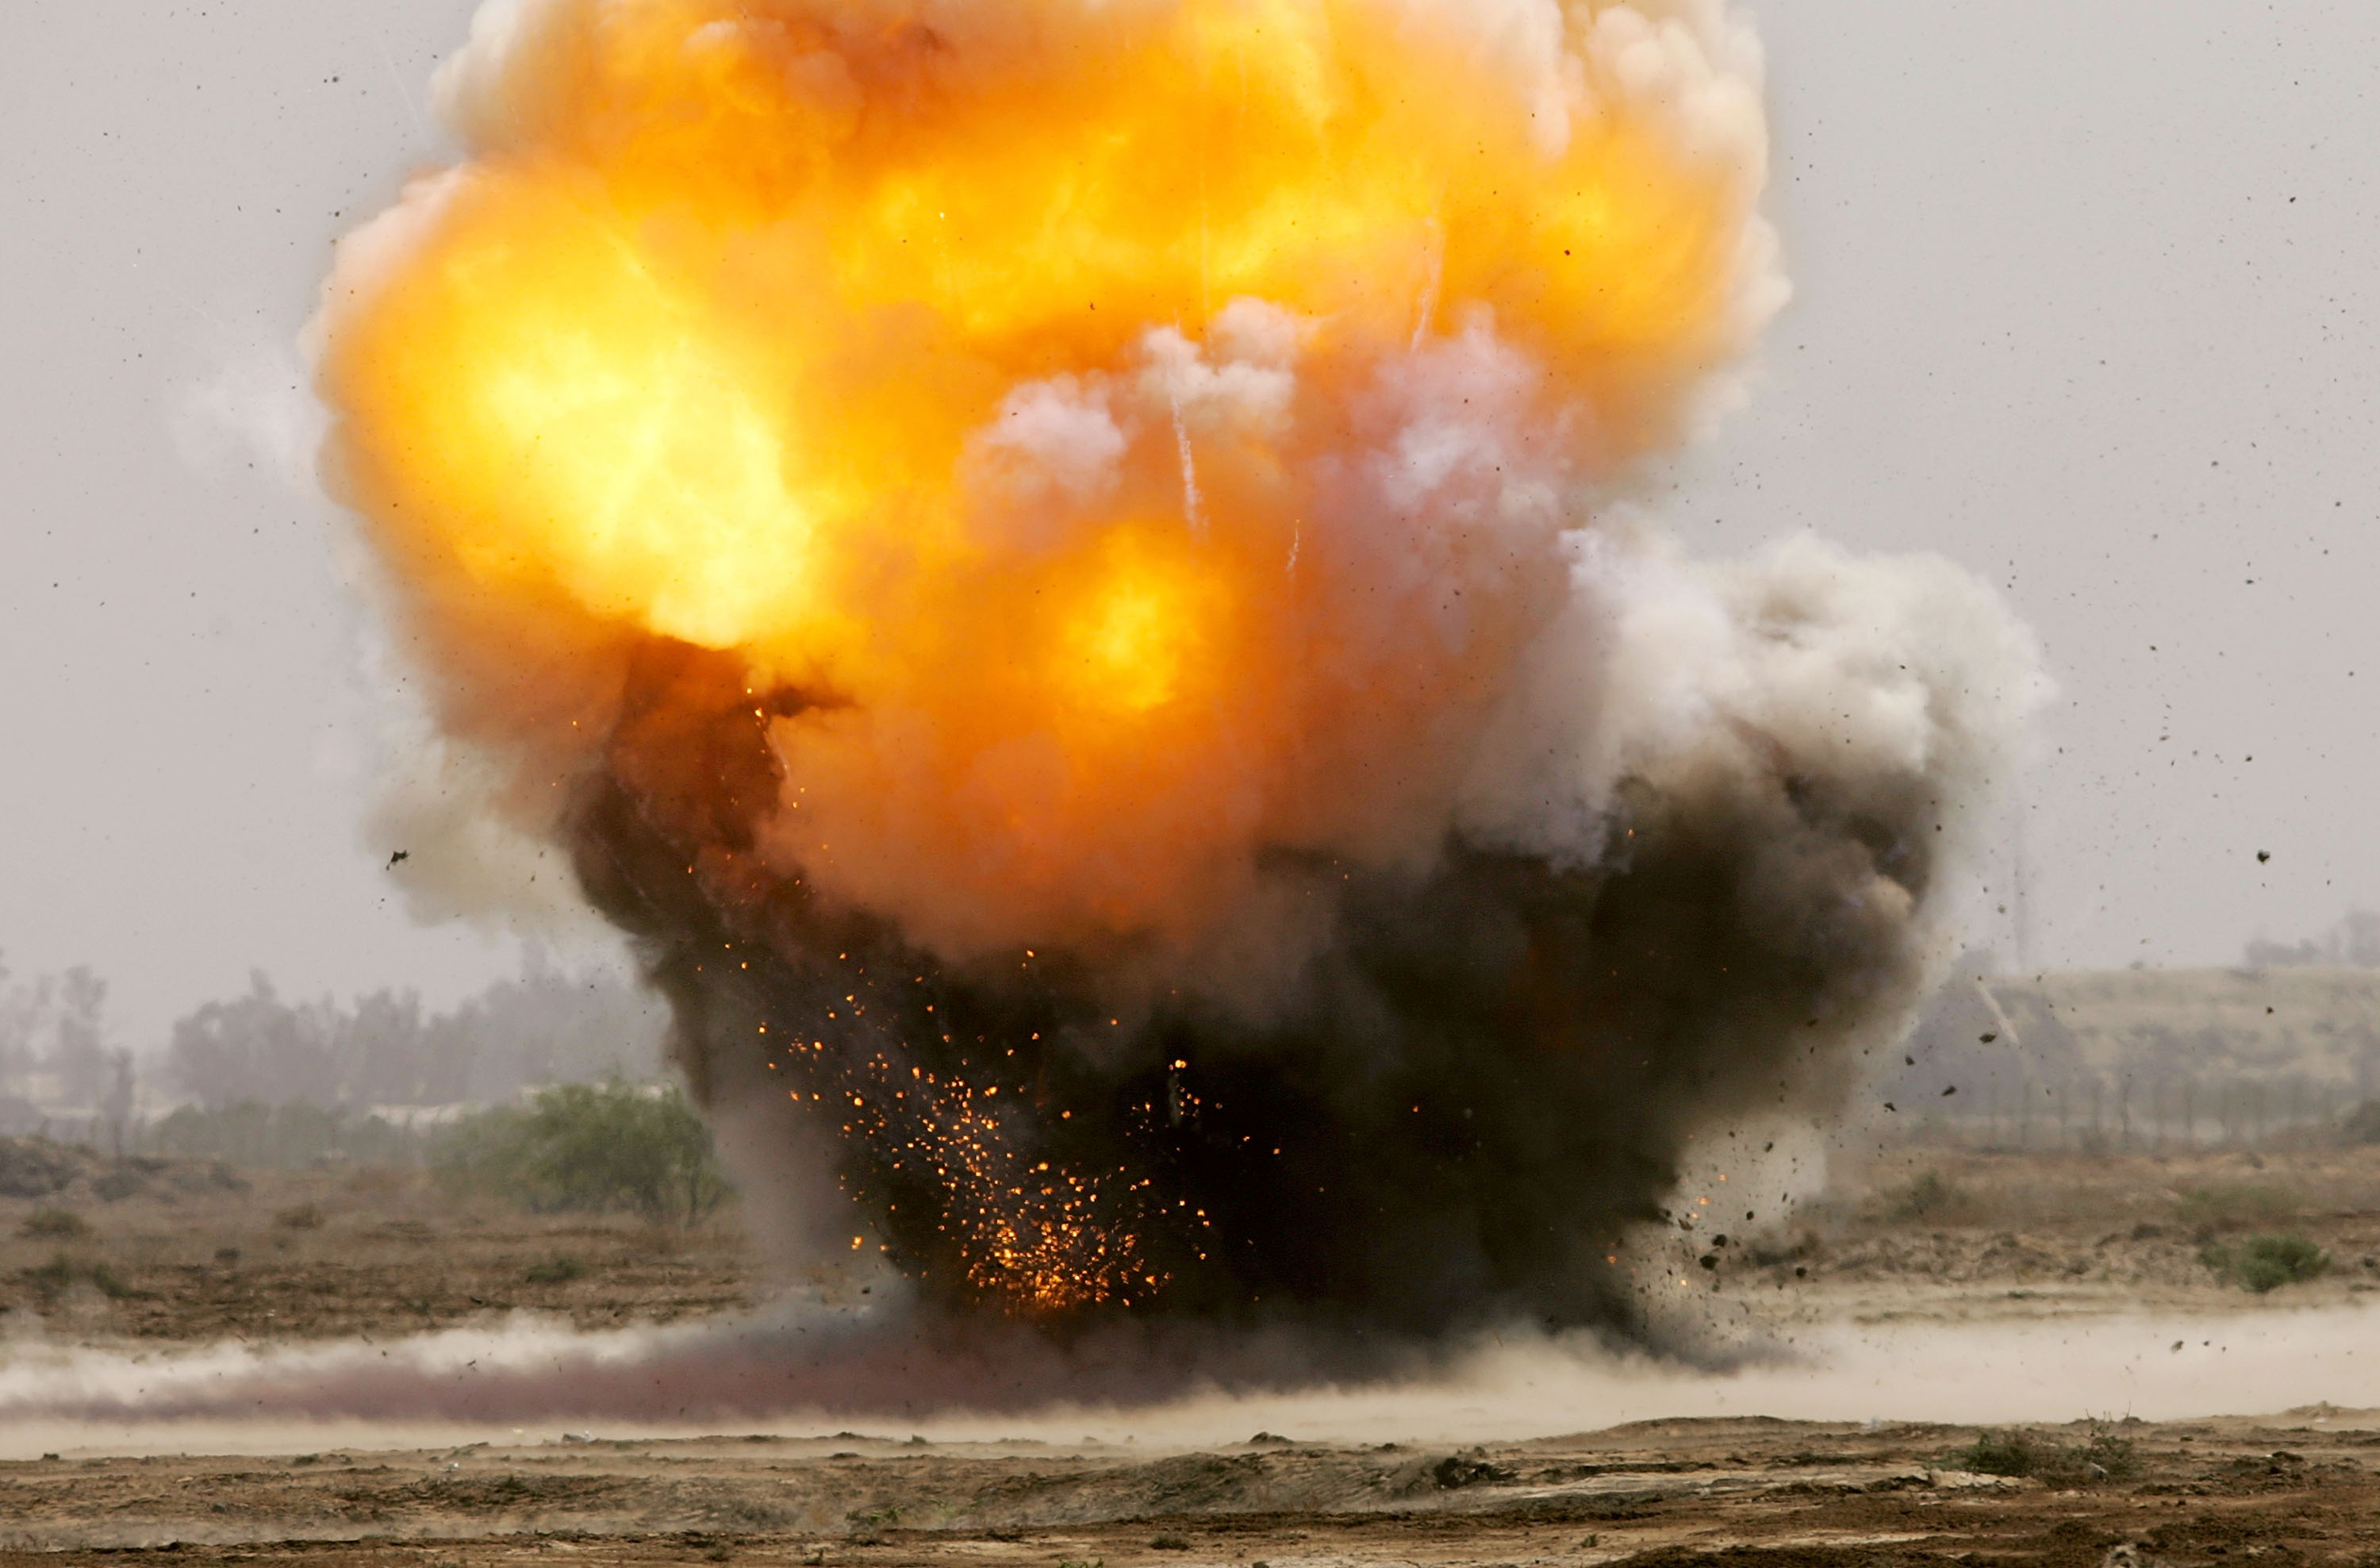 Army Explosives Team Destroys Roadside Bombs In Iraq